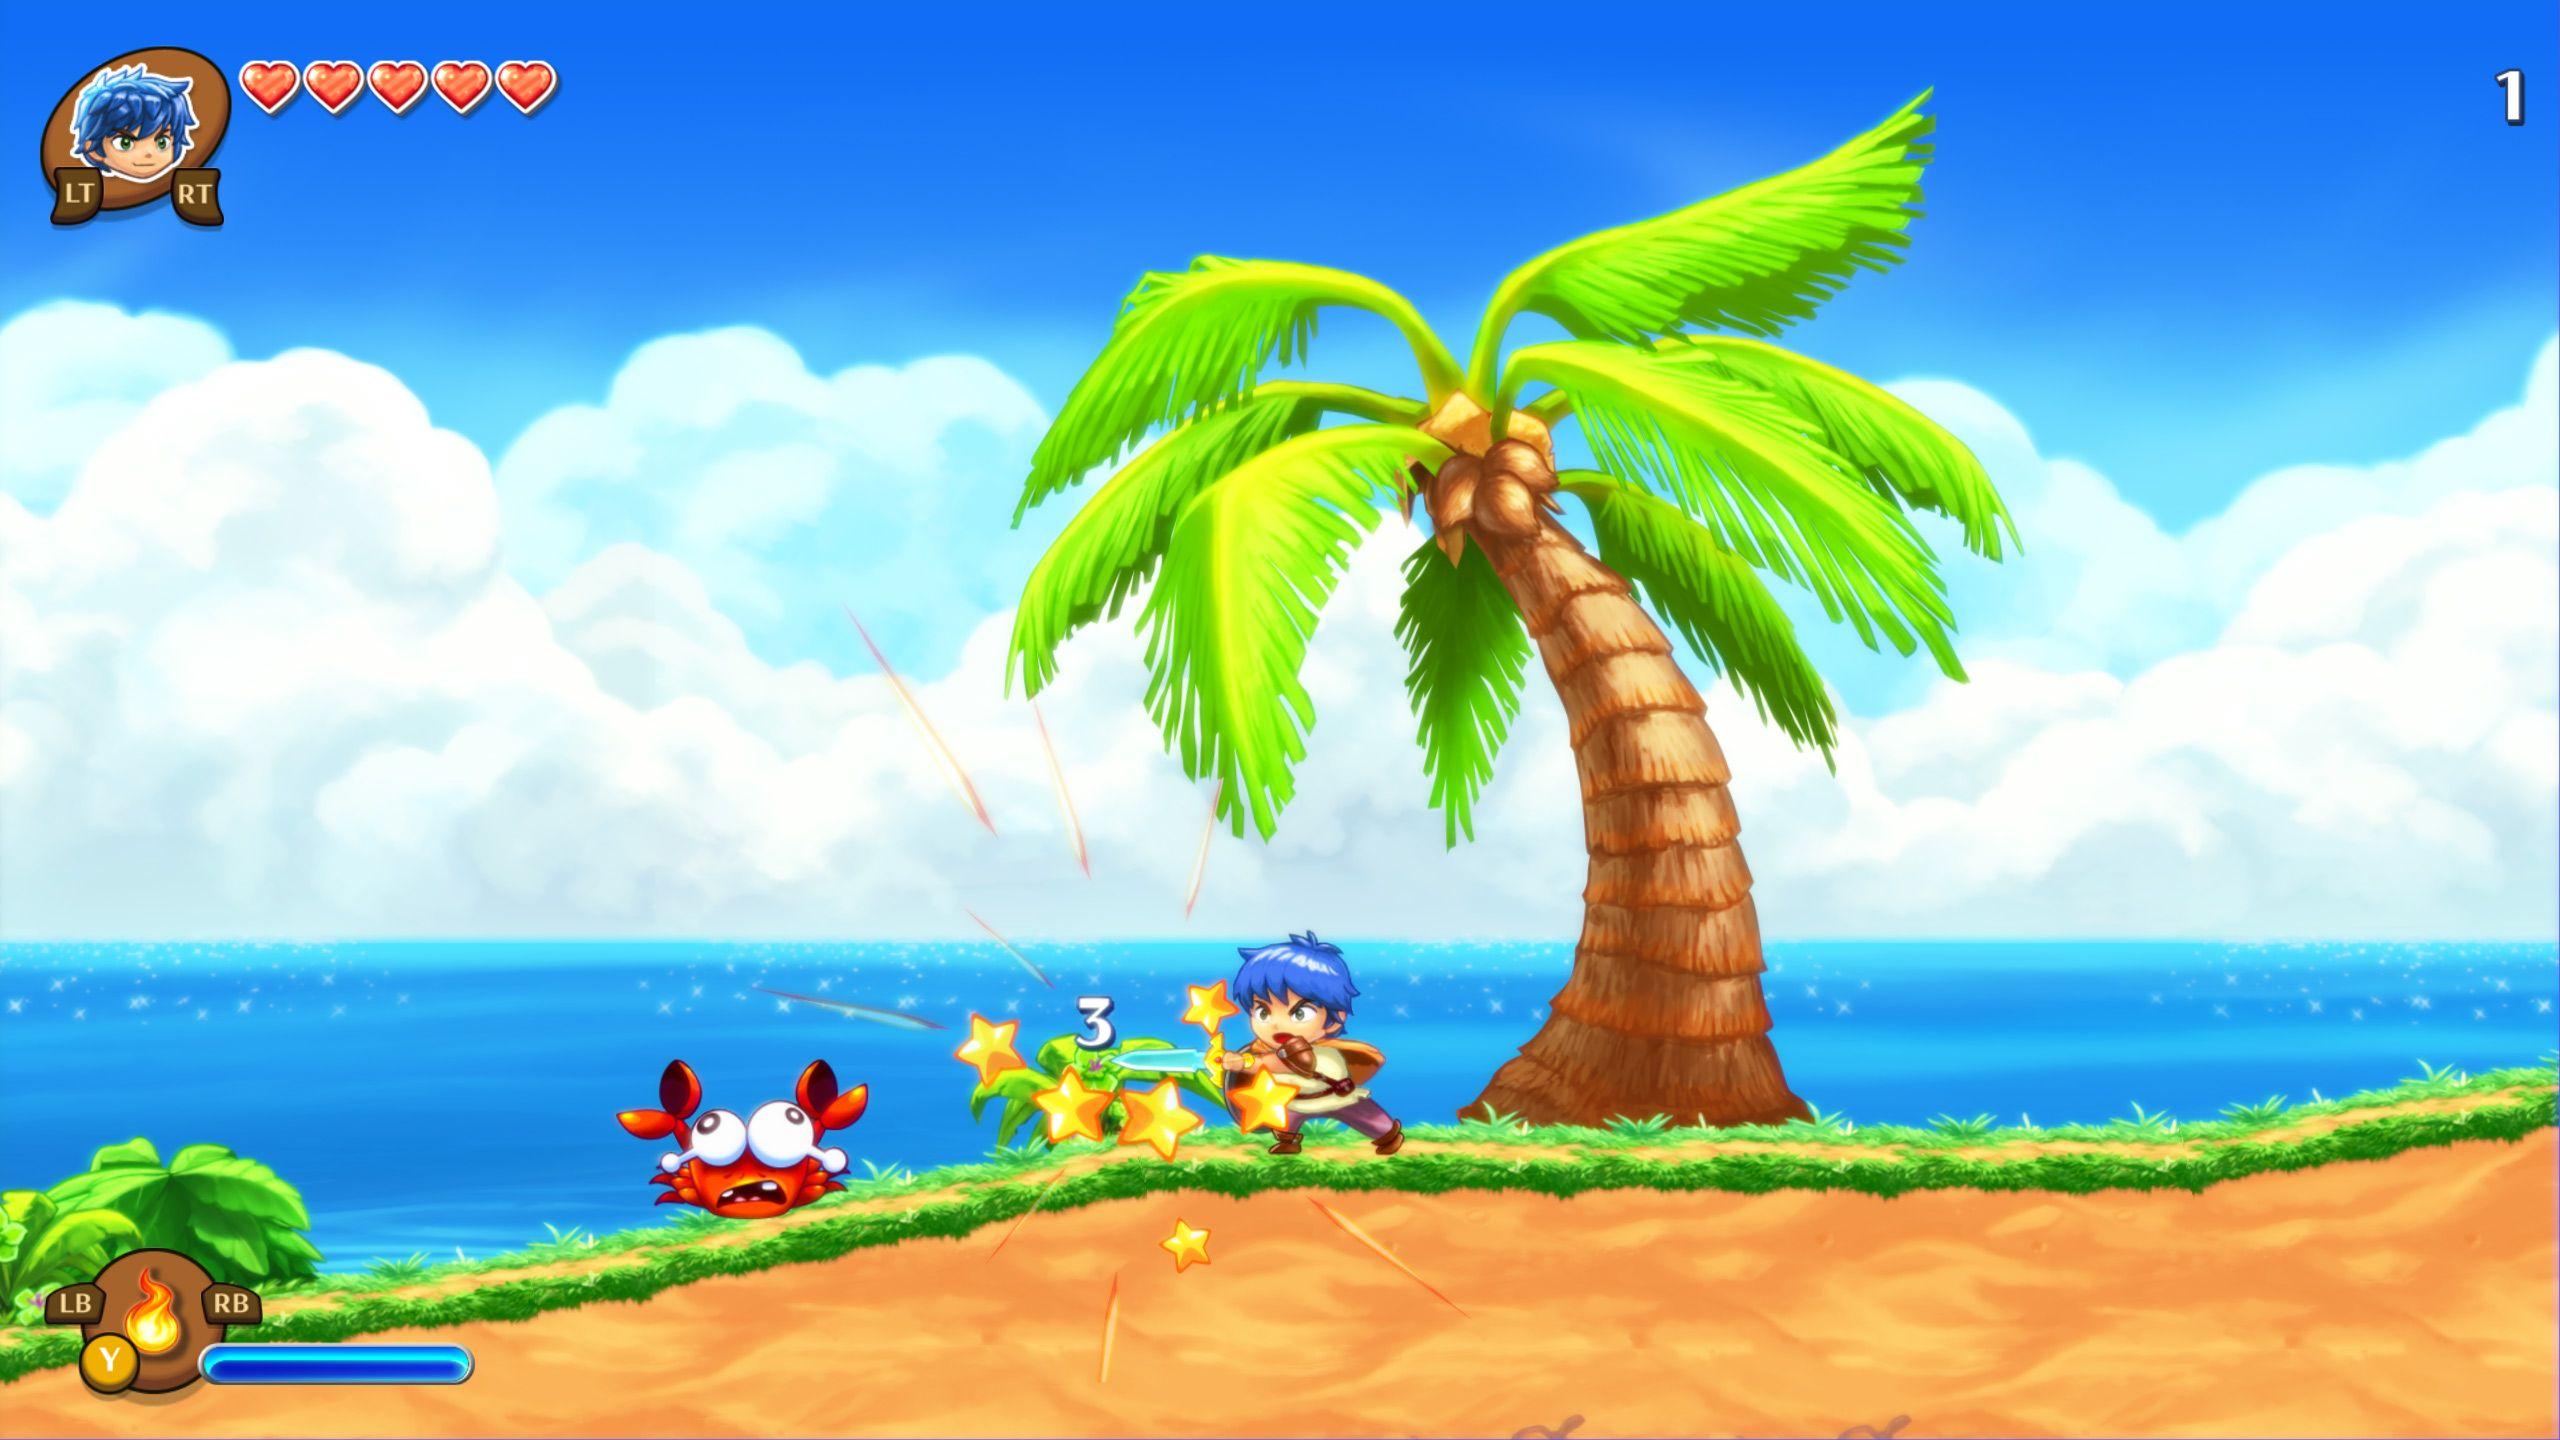 minutes of Monster Boy and the Cursed Kingdom